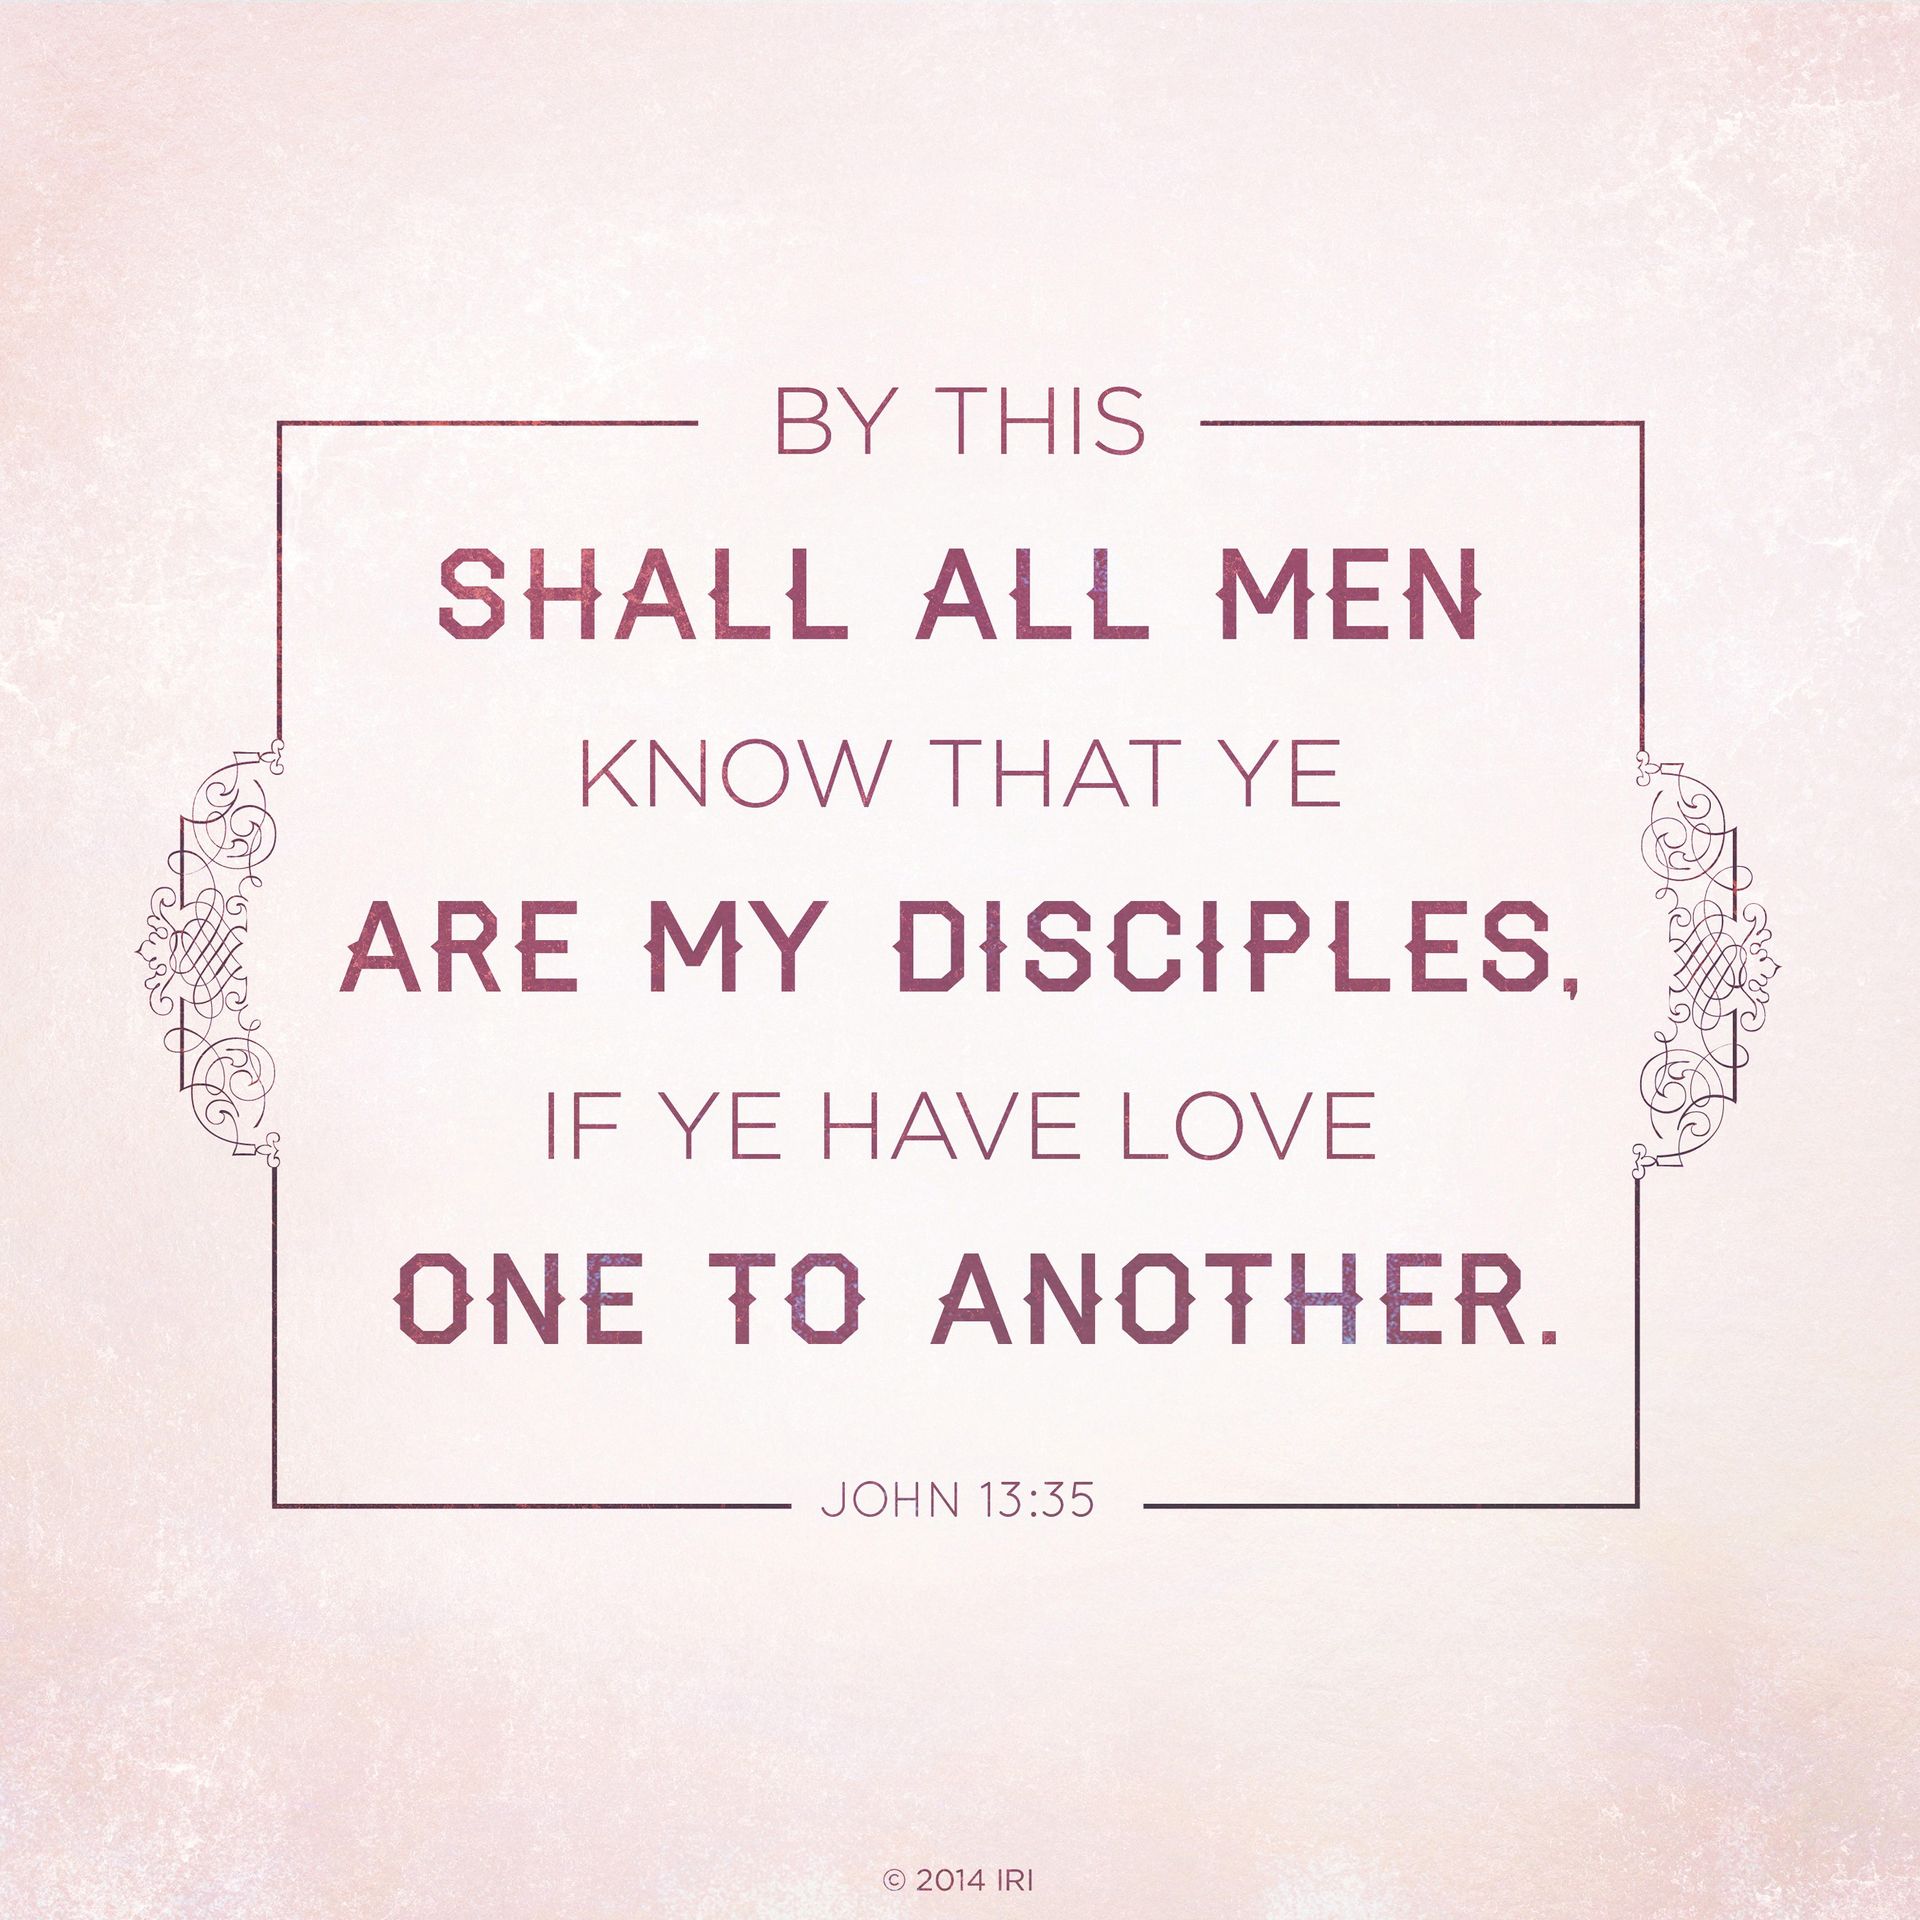 “By this shall all men know that ye are my disciples, if ye have love one to another.”—John 13:35